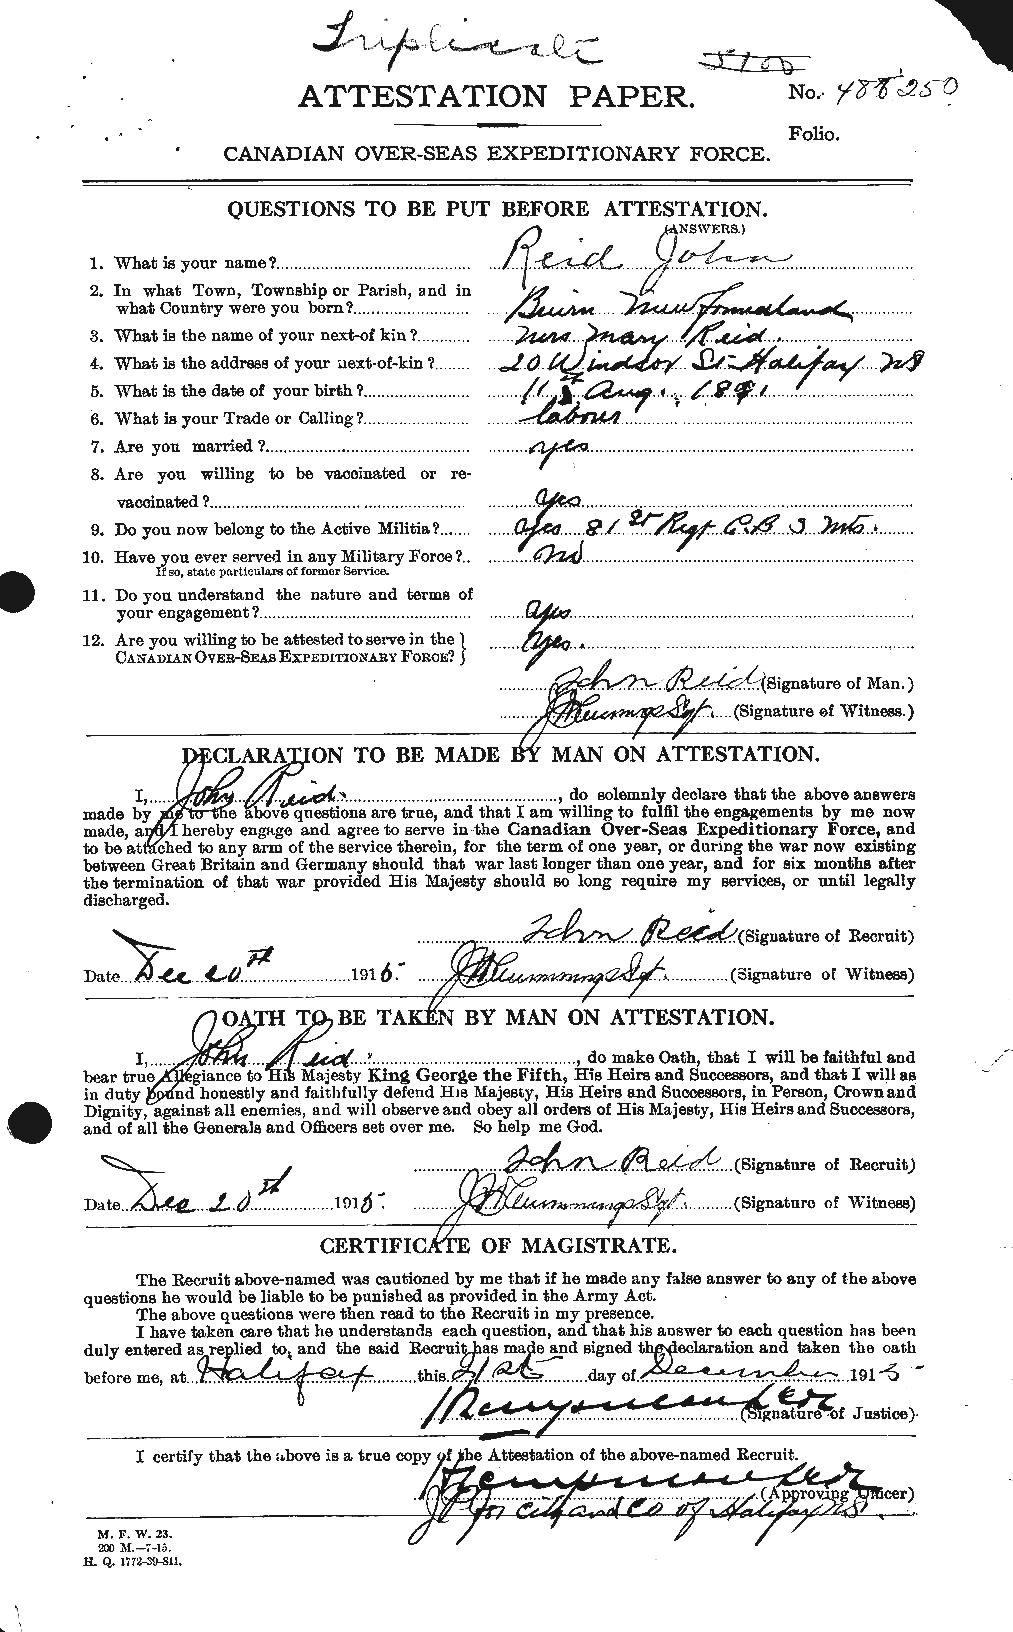 Personnel Records of the First World War - CEF 598756a